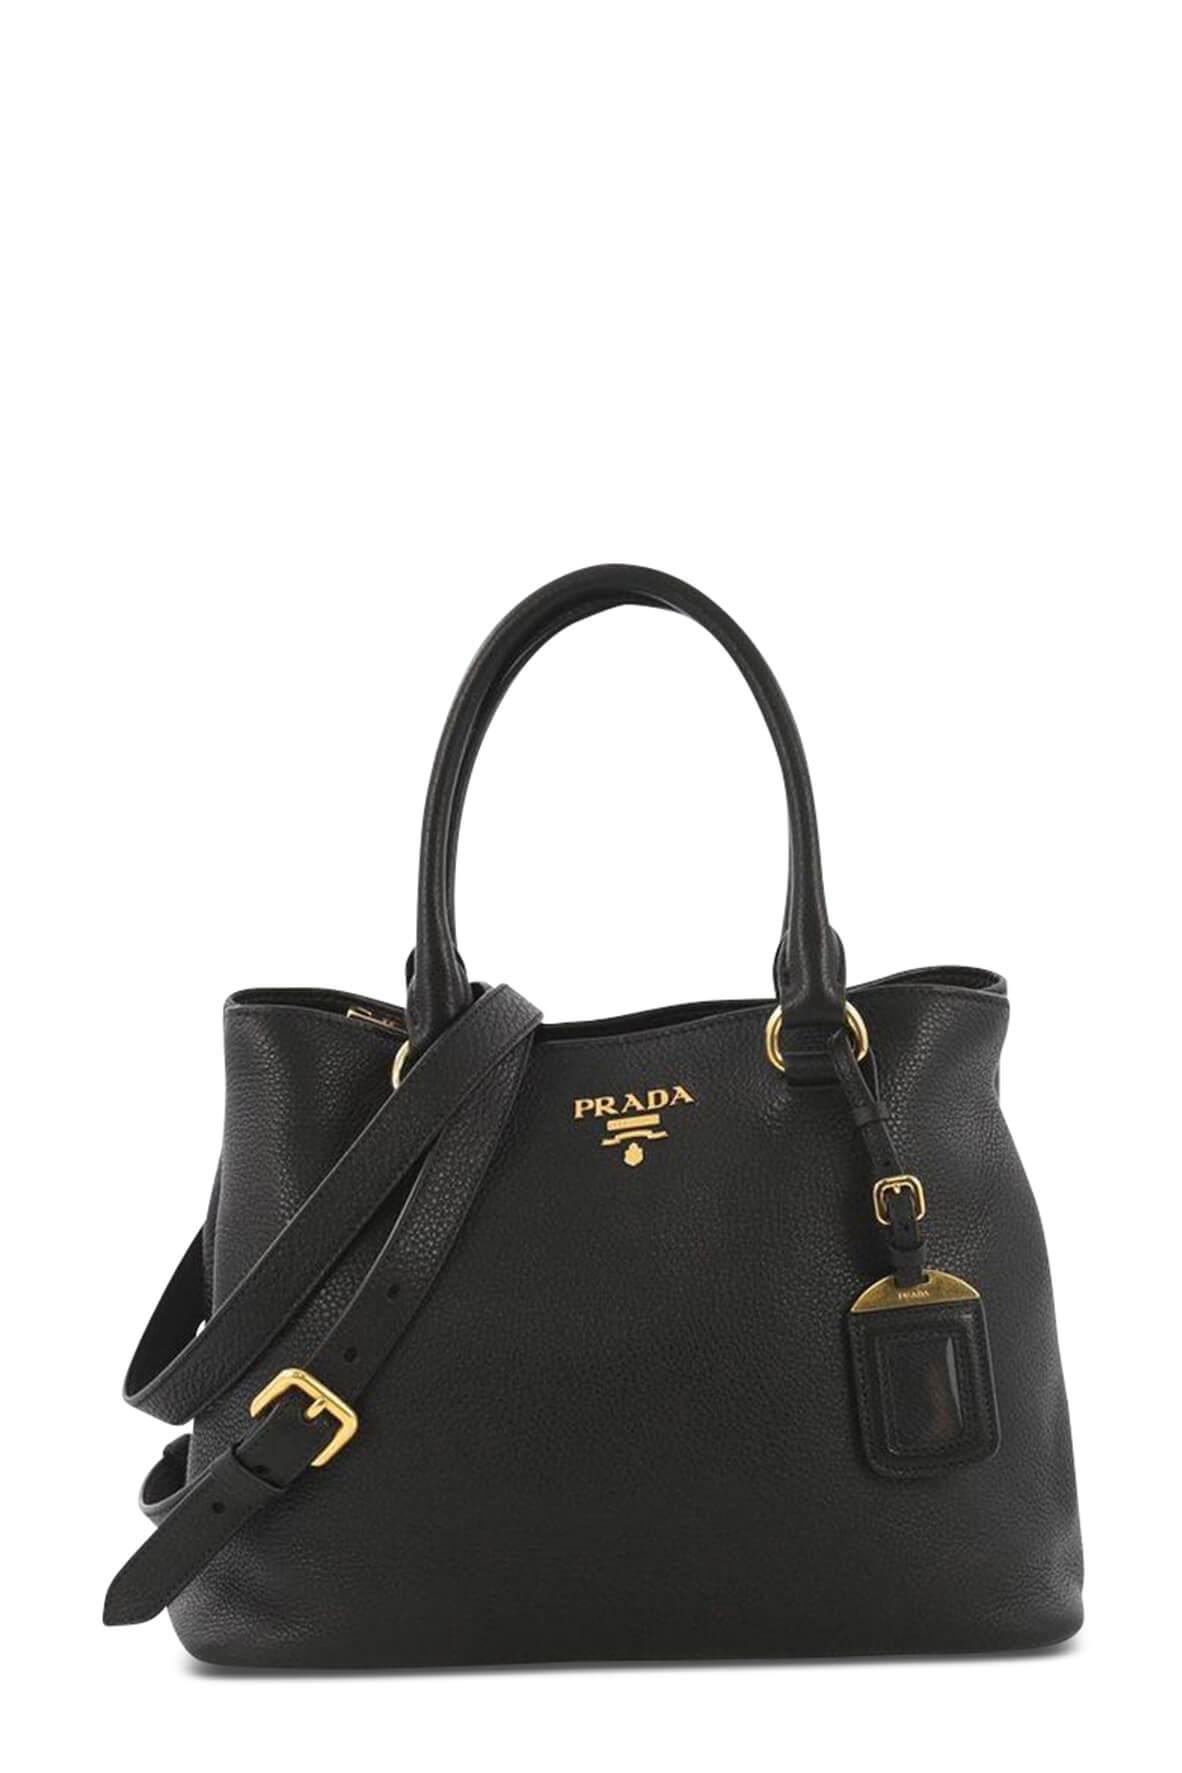 Black Prada Leather Bags: Shop at $525.00+ | Stylight